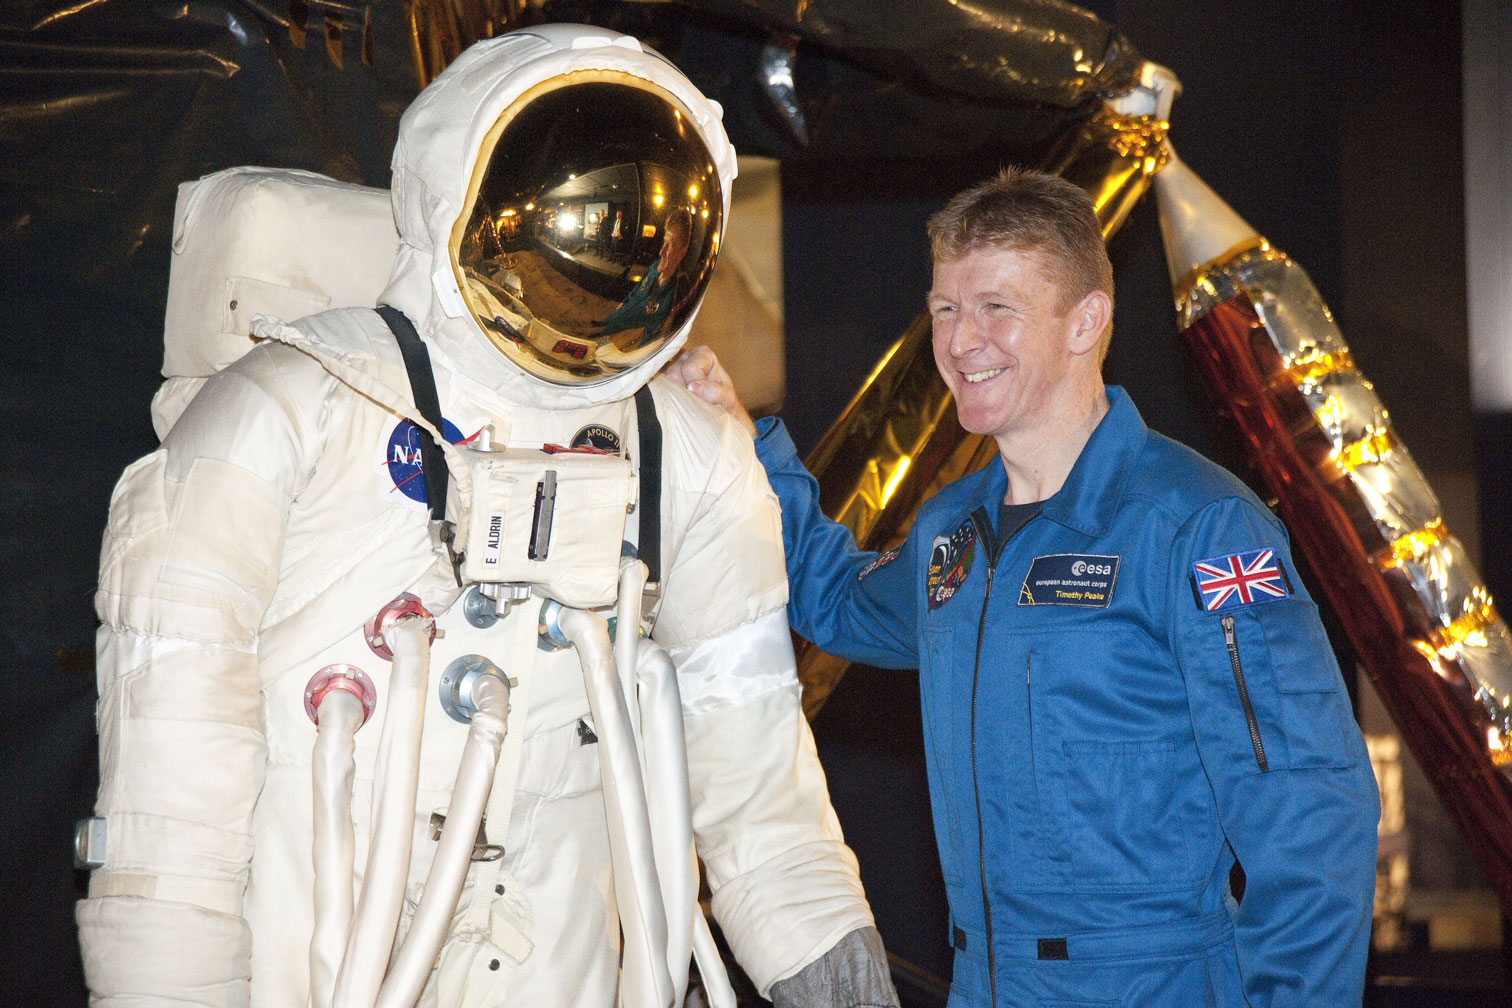 Tim Peake pictured with a space suit from the Exploring Space gallery. Image: Science Museum